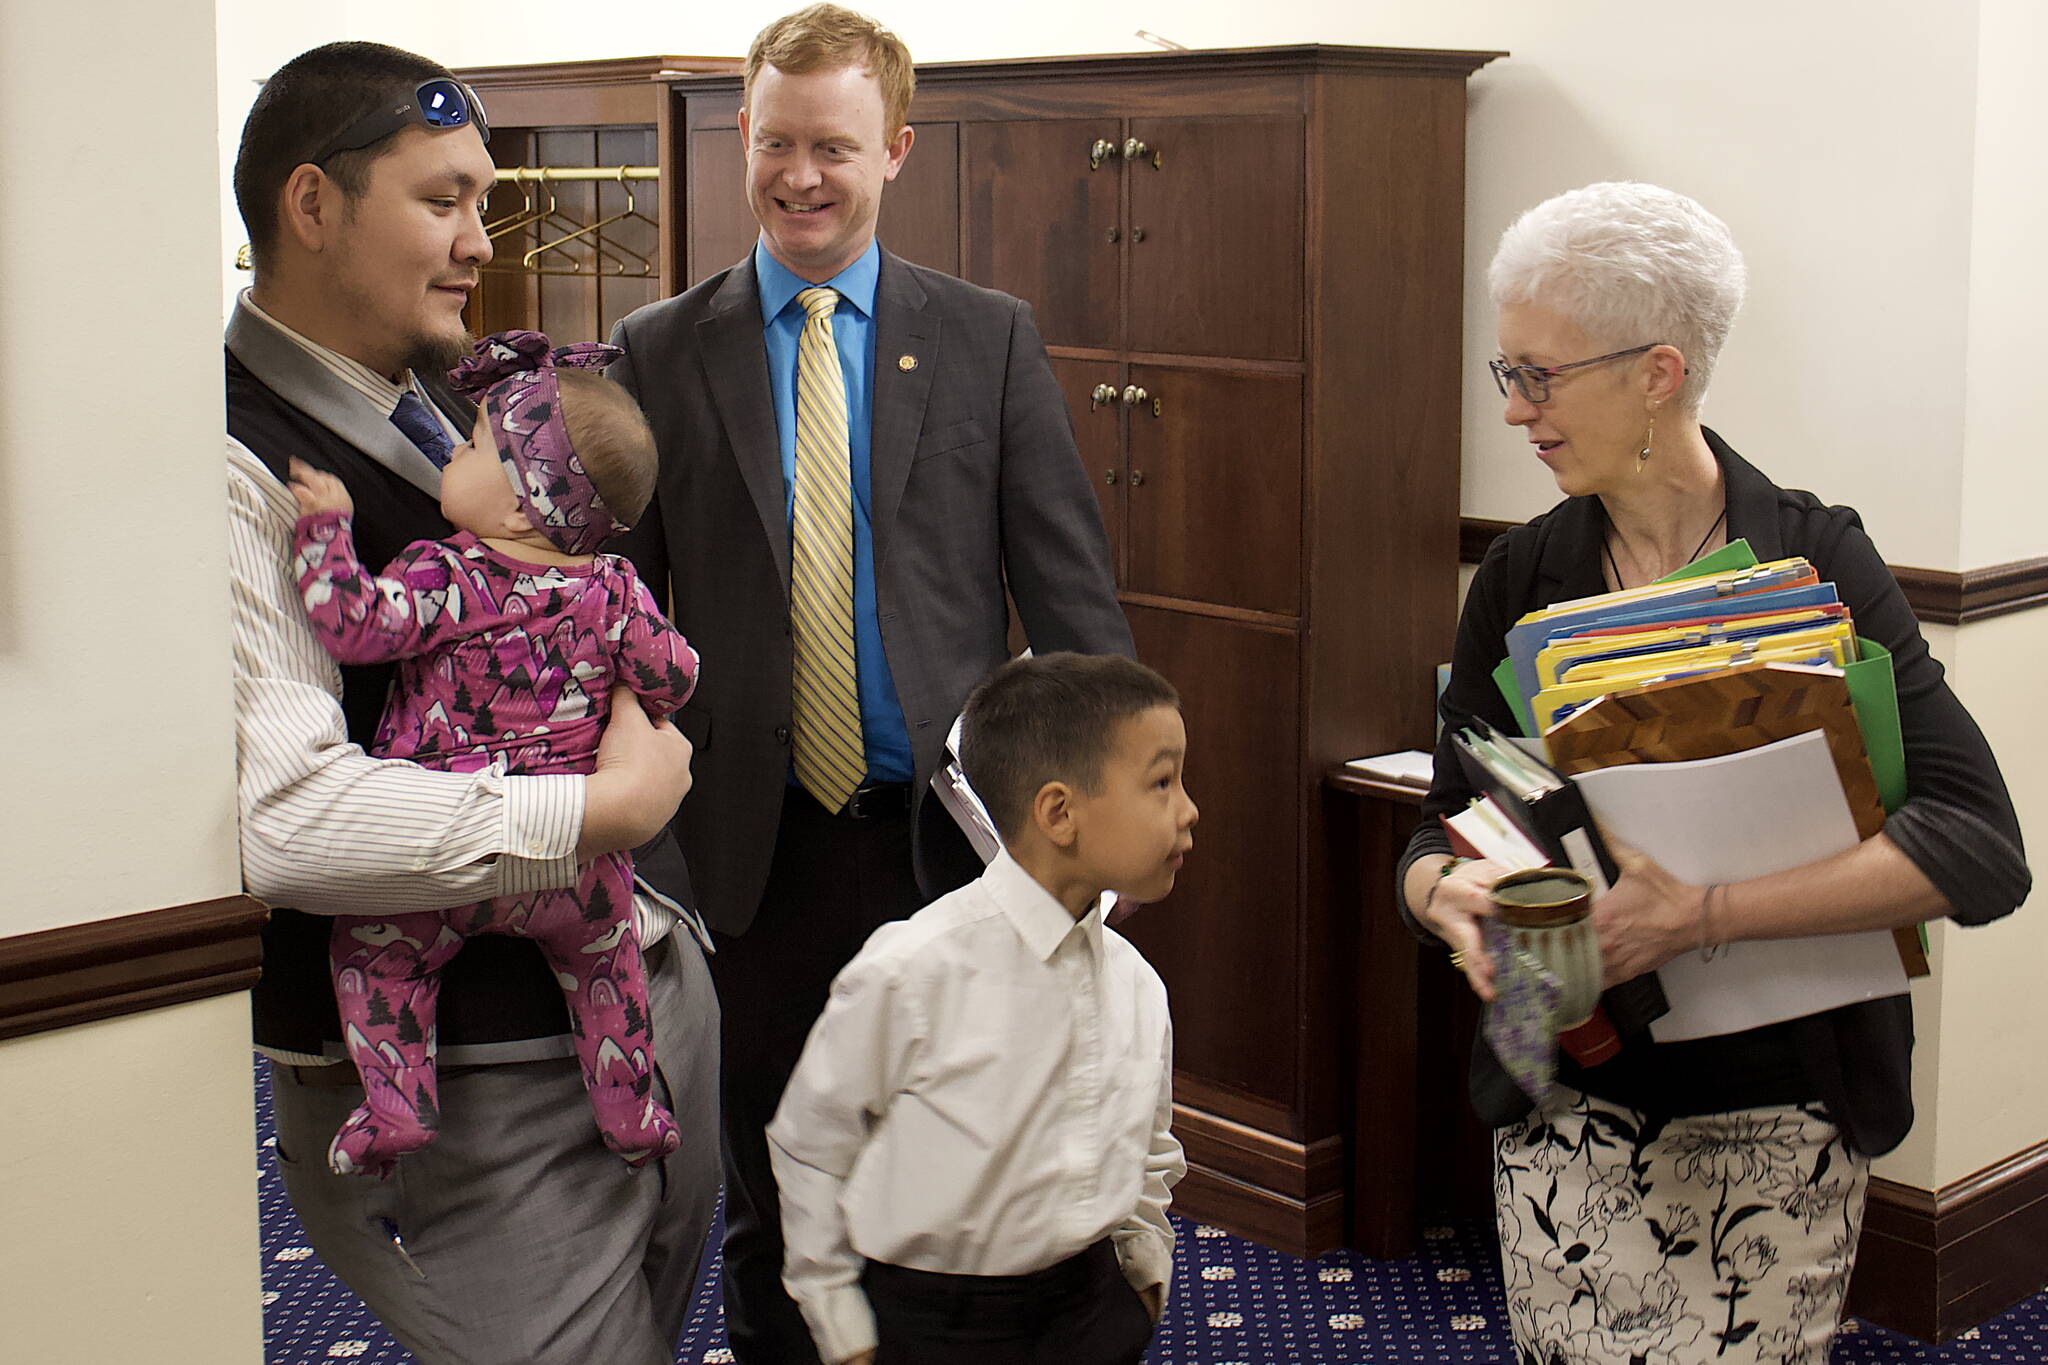 State Rep. Josiah Patkotak, I-Utqiagvik, left, holds his daughter, Francine Jo, seven months old, while his son, Dillion, 7, greets Chief House Clerk Crys Jones and Rep. David Eastman, R-Wasilla, looks on before the start of the House floor session Saturday. It is the first weekend floor session this year for both the House and Senate as they try to conclude their legislative business before their scheduled adjournment Wednesday. (Mark Sabbatini / Juneau Empire)